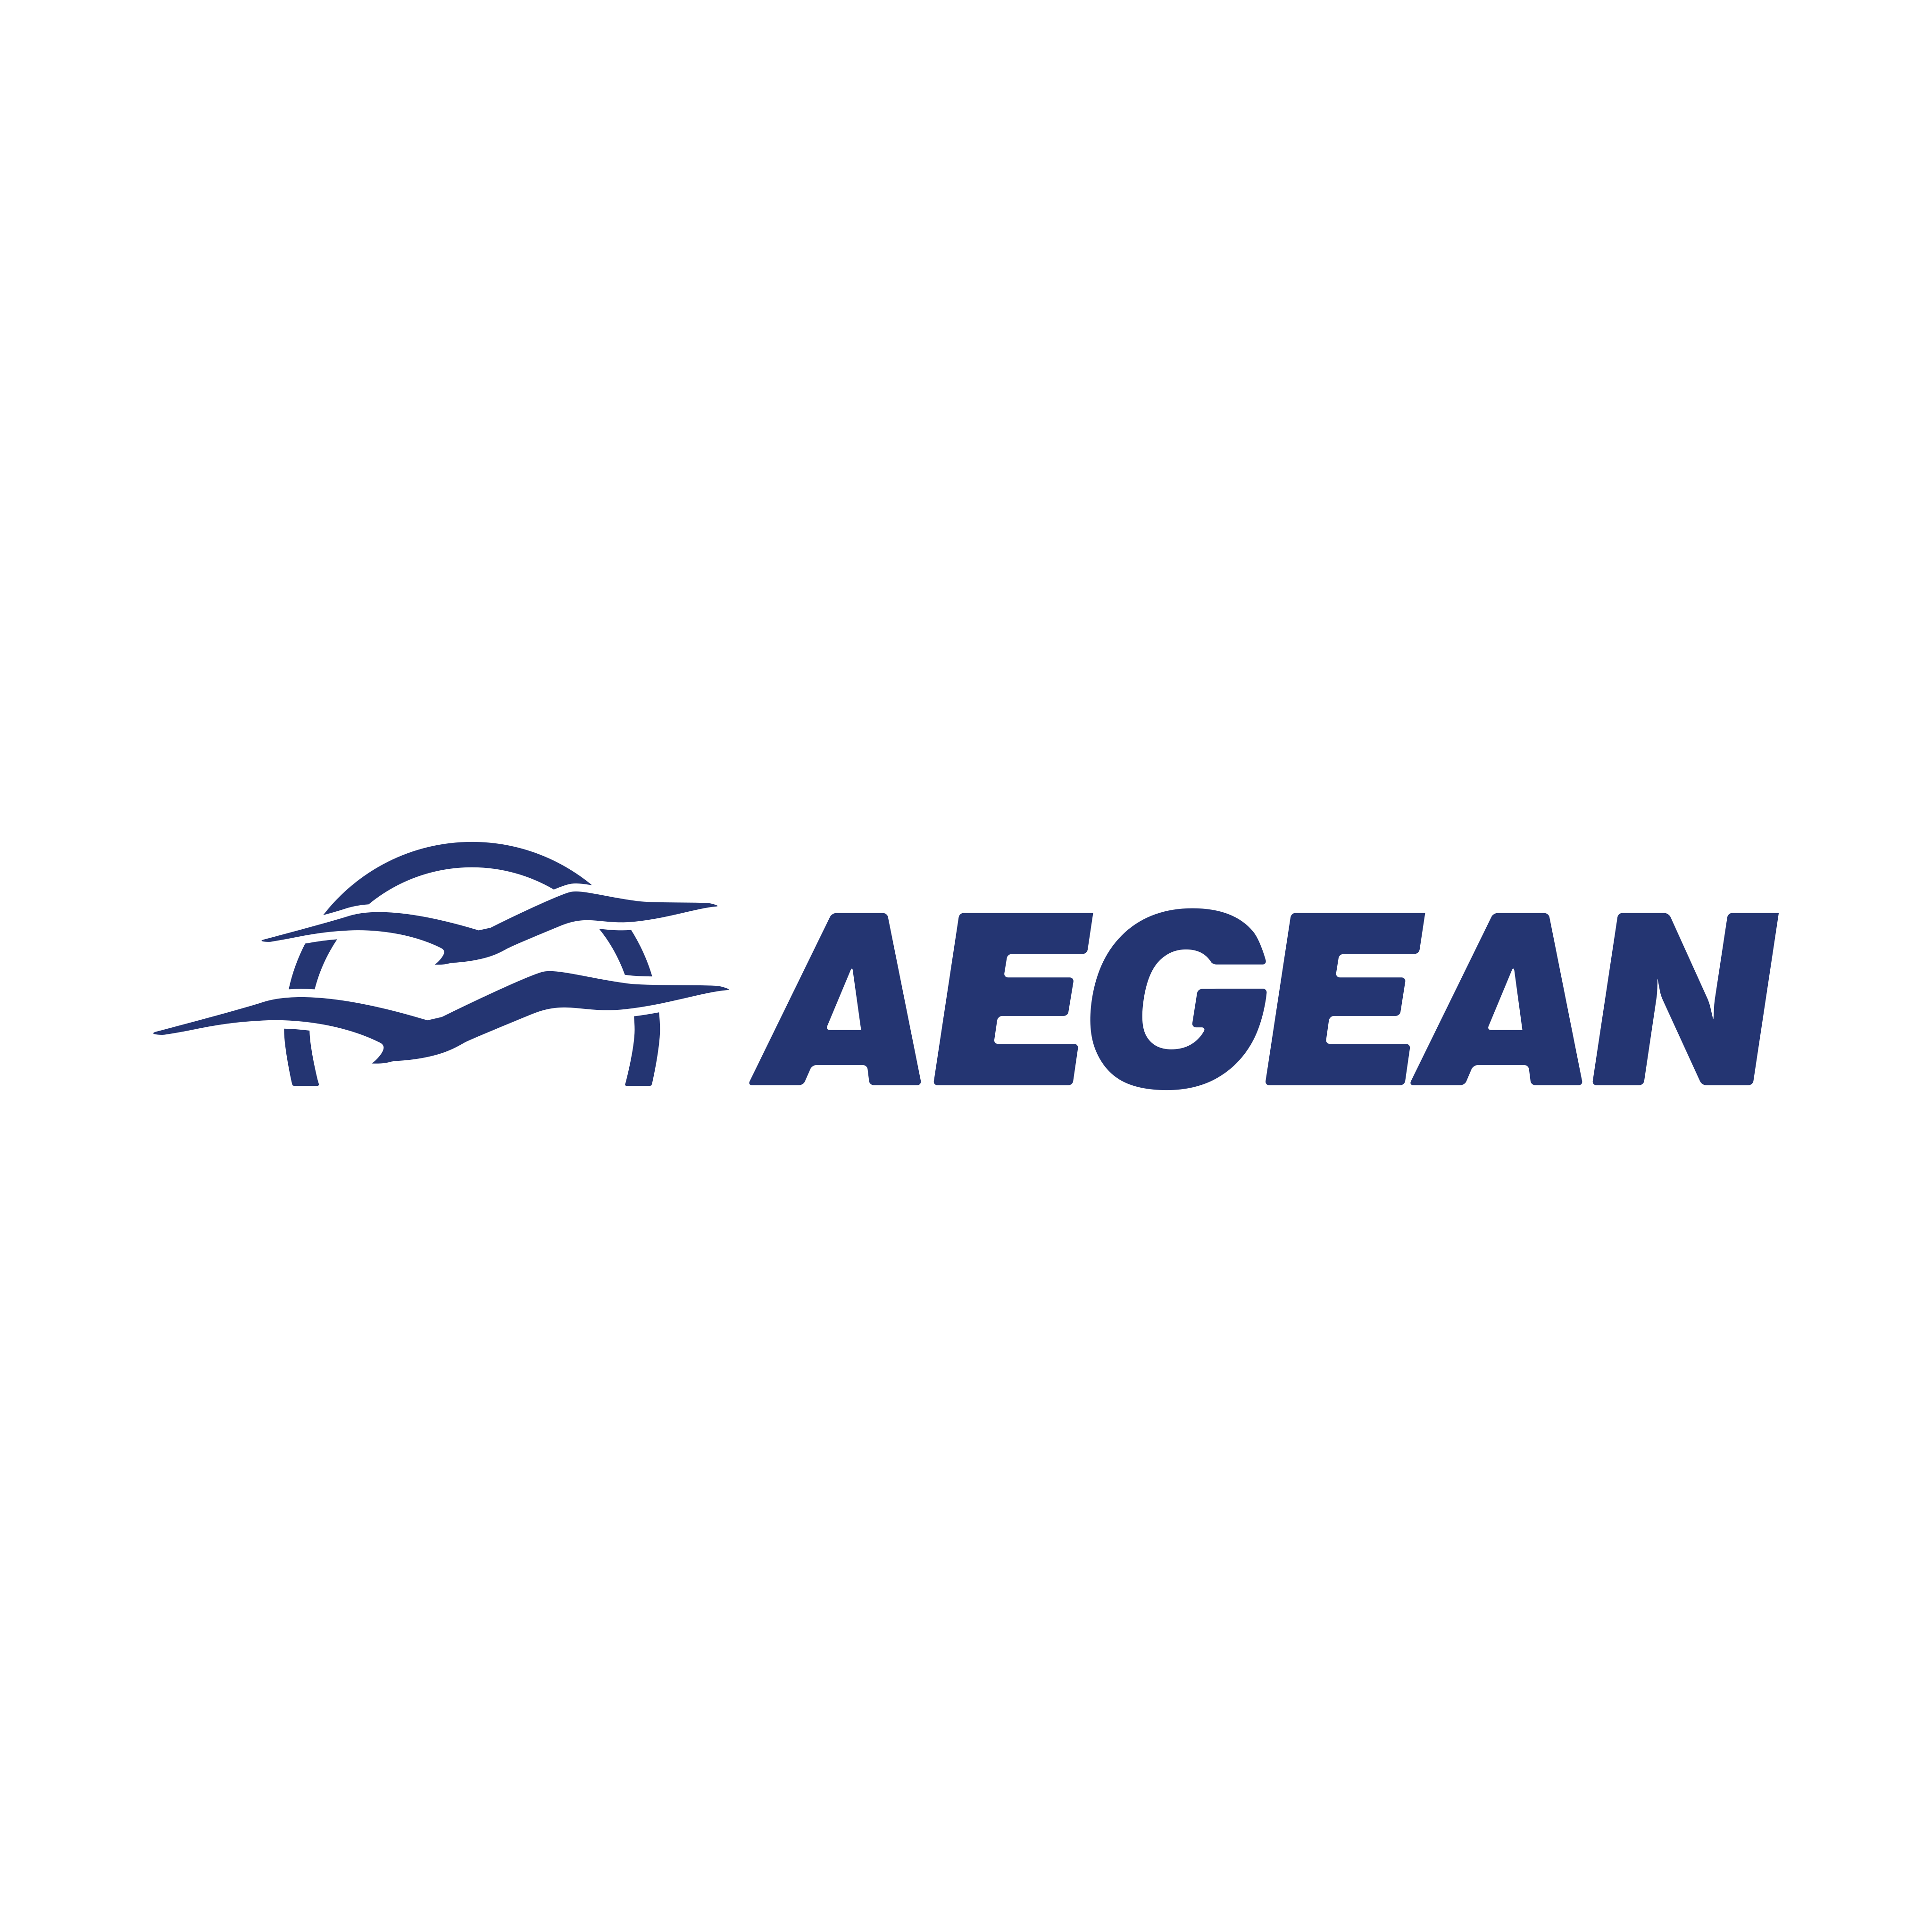 Aegean Airlines Logo PNG.